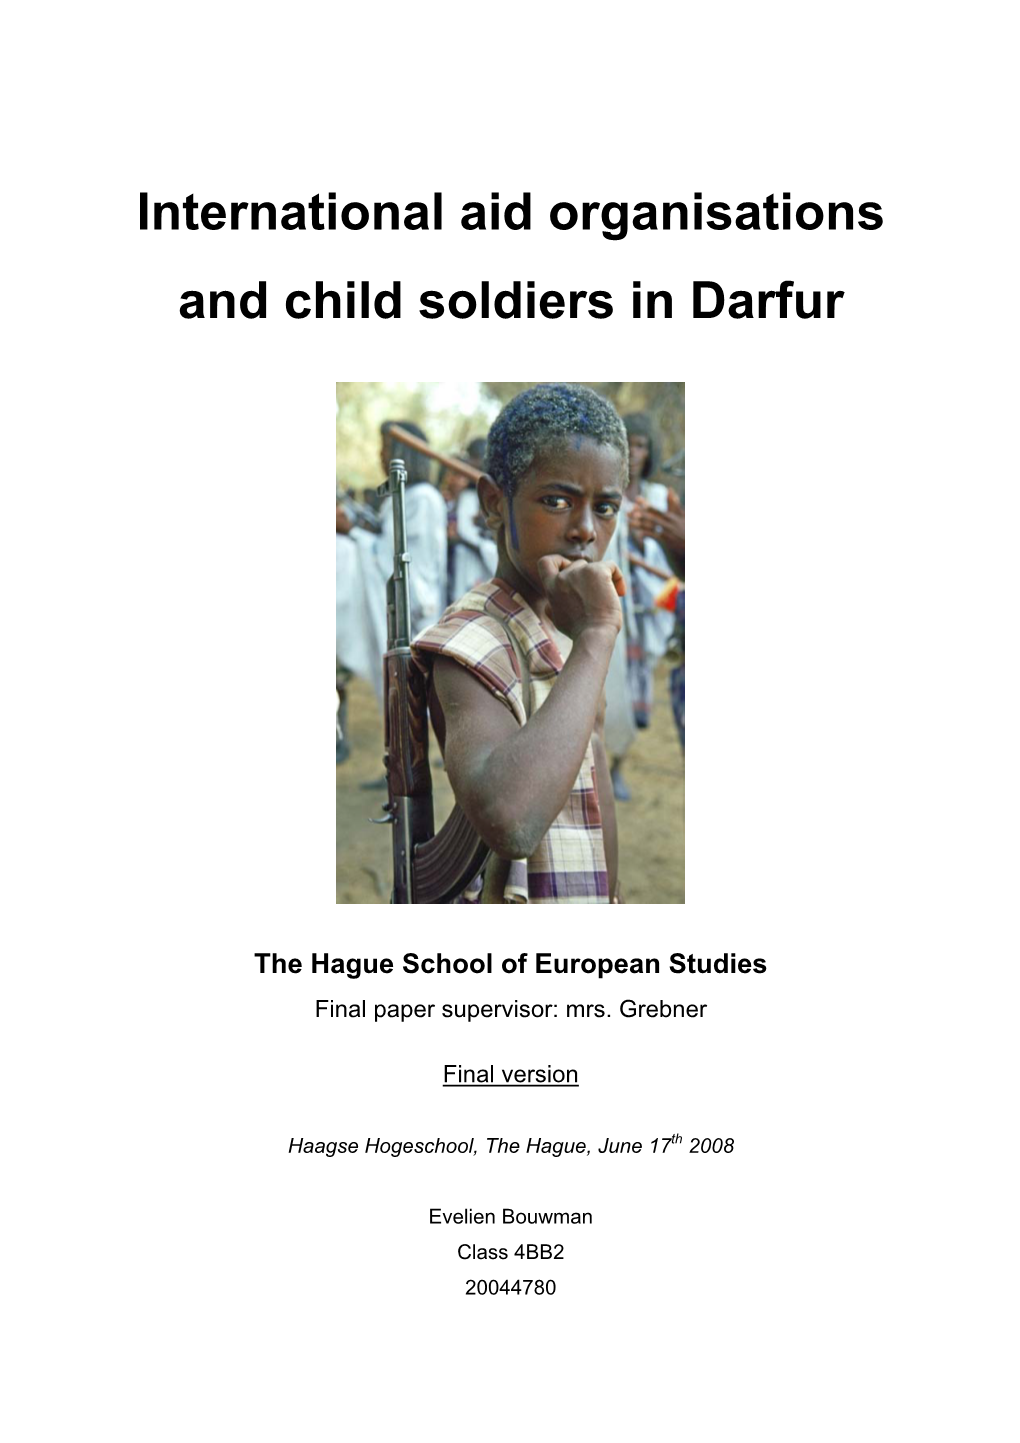 International Aid Organisations and Child Soldiers in Darfur